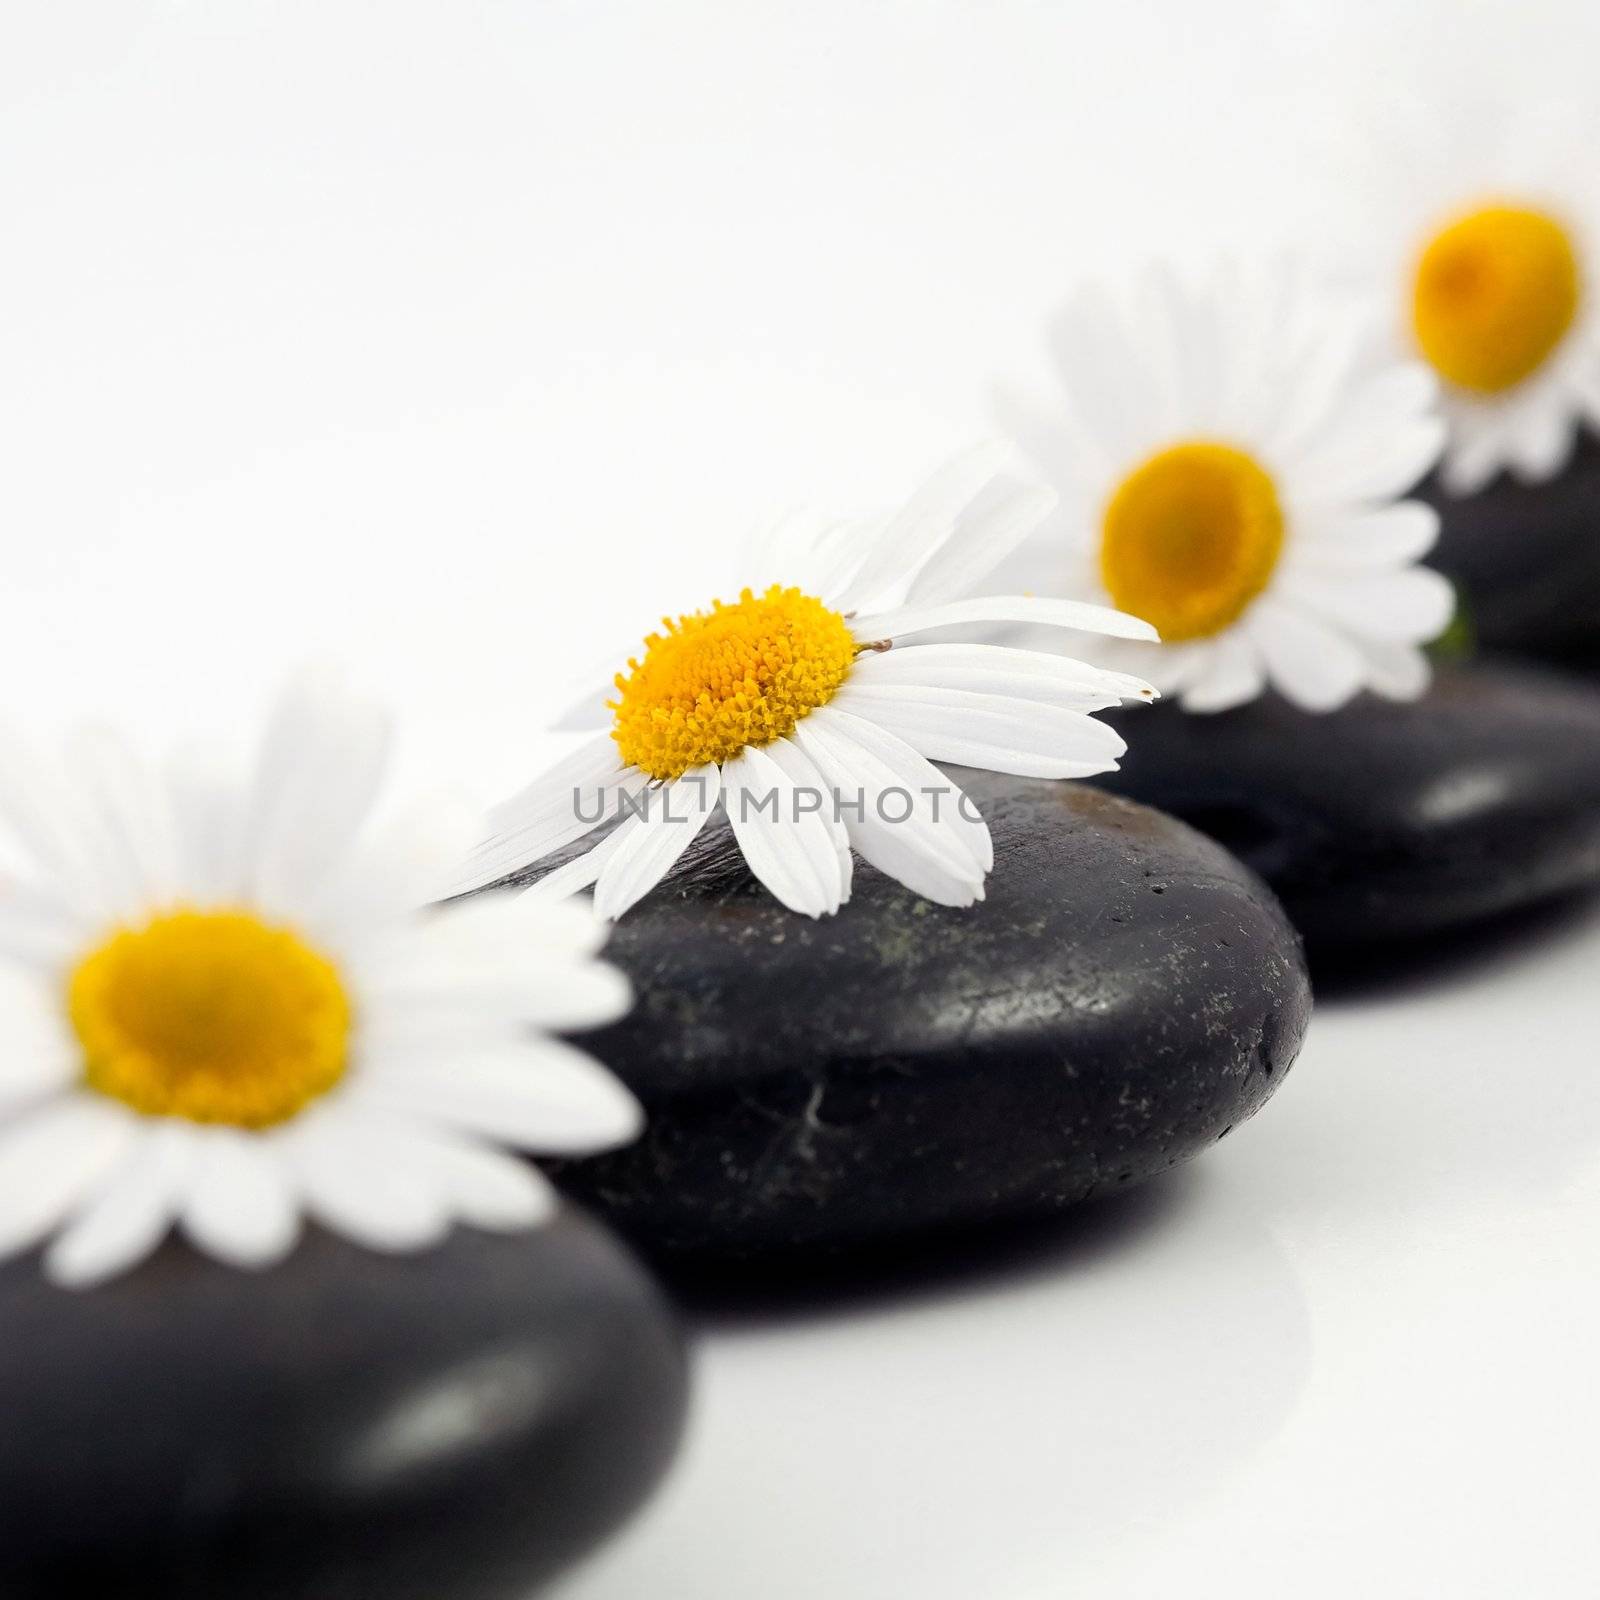 An image of white flowers on black stones